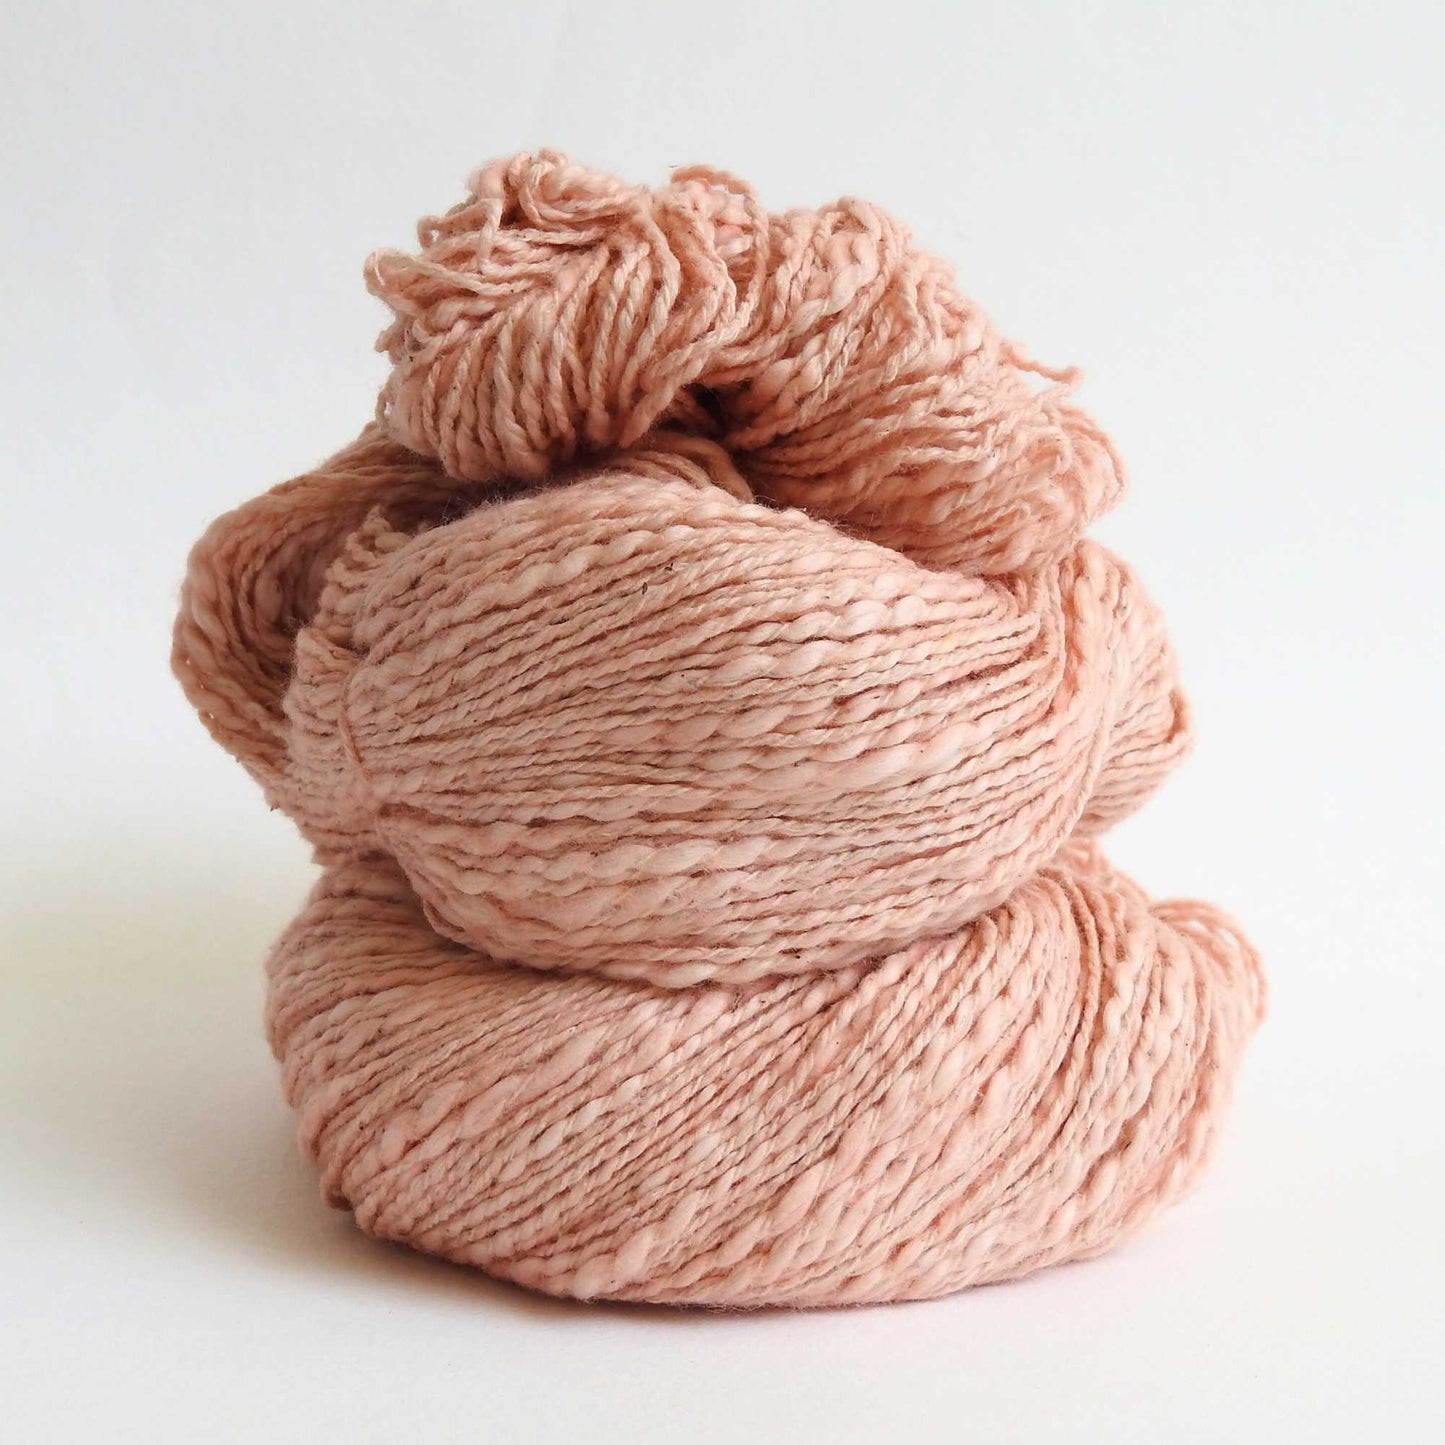 
                  
                    Skein of organic natural Cotton yarn in soft apricot. Cotton yarn is super soft with a slight slub for texture. Cotton knitting yarn Australia in off white. For knitting, weaving and crochet
                  
                